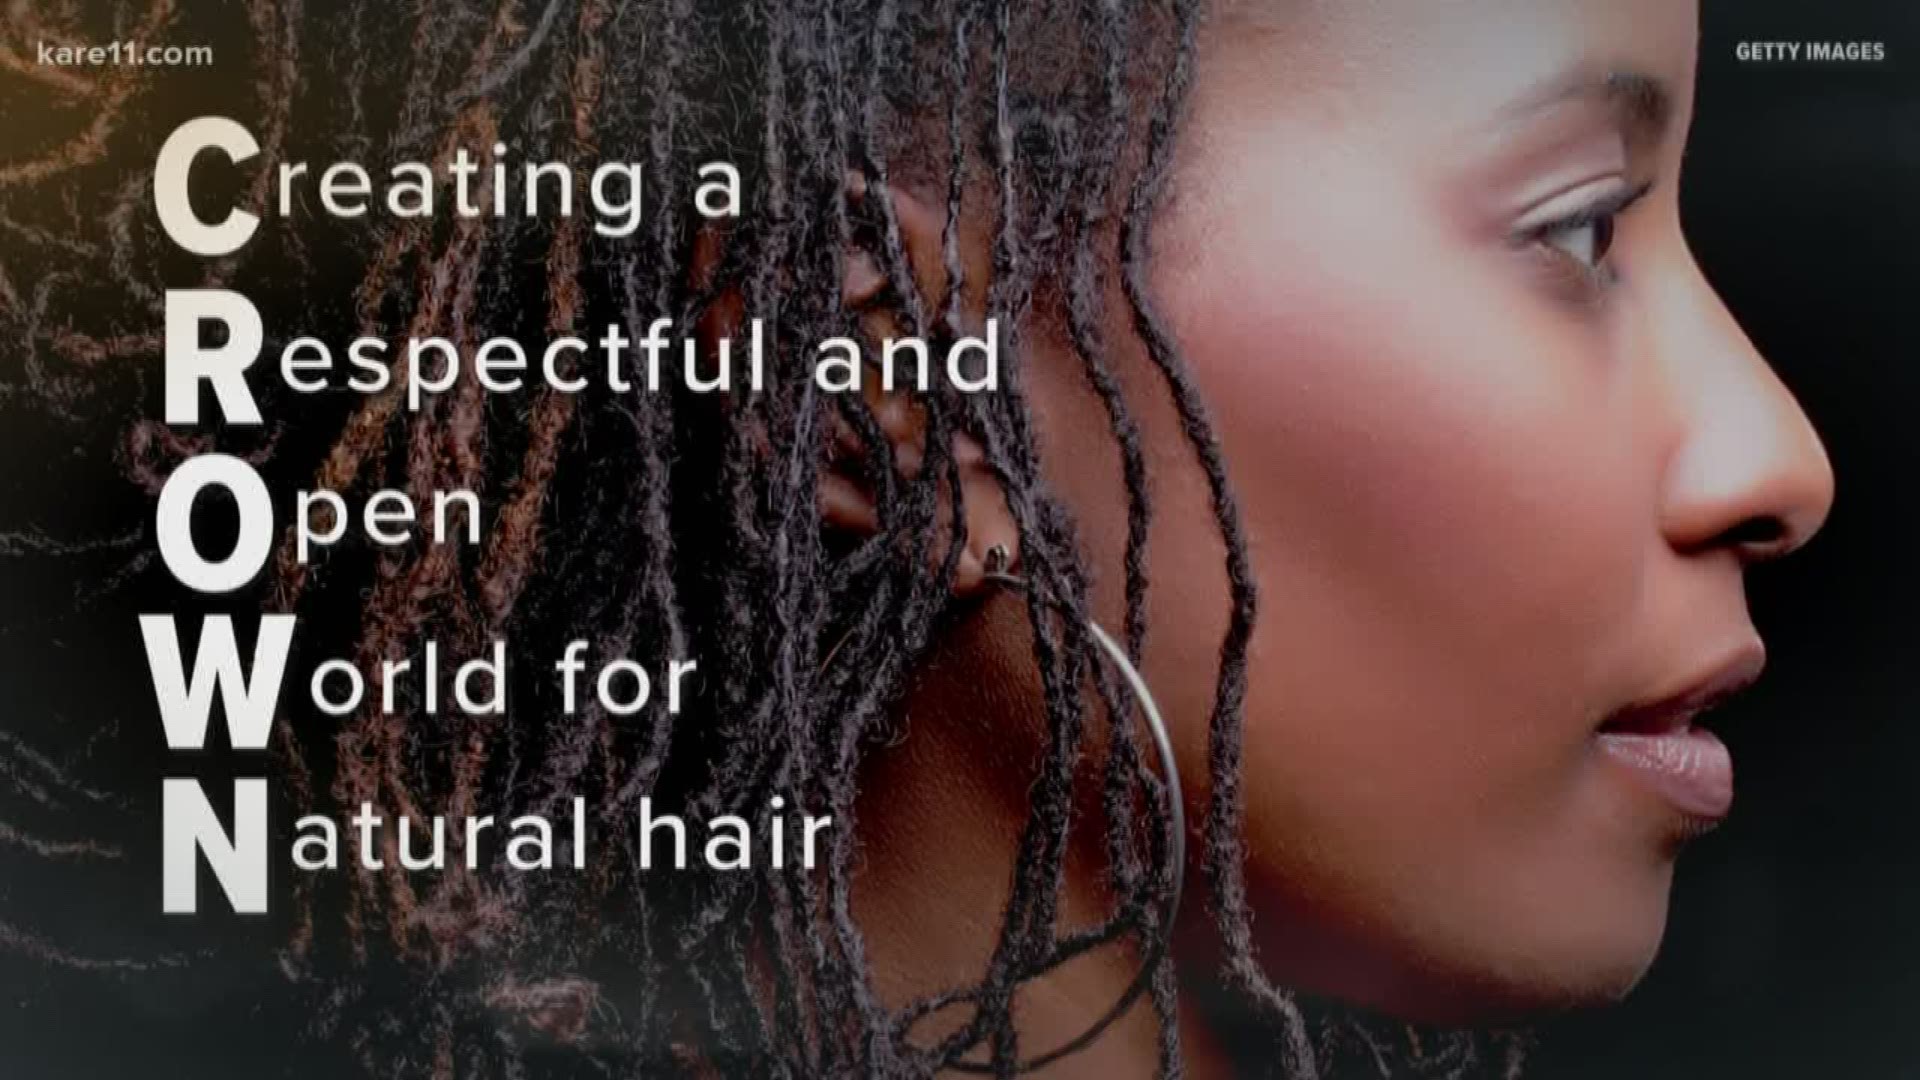 House Bill 567 would prohibit schools and workplaces from discriminating based on certain hairstyles - including braids, dreadlocks and twists.